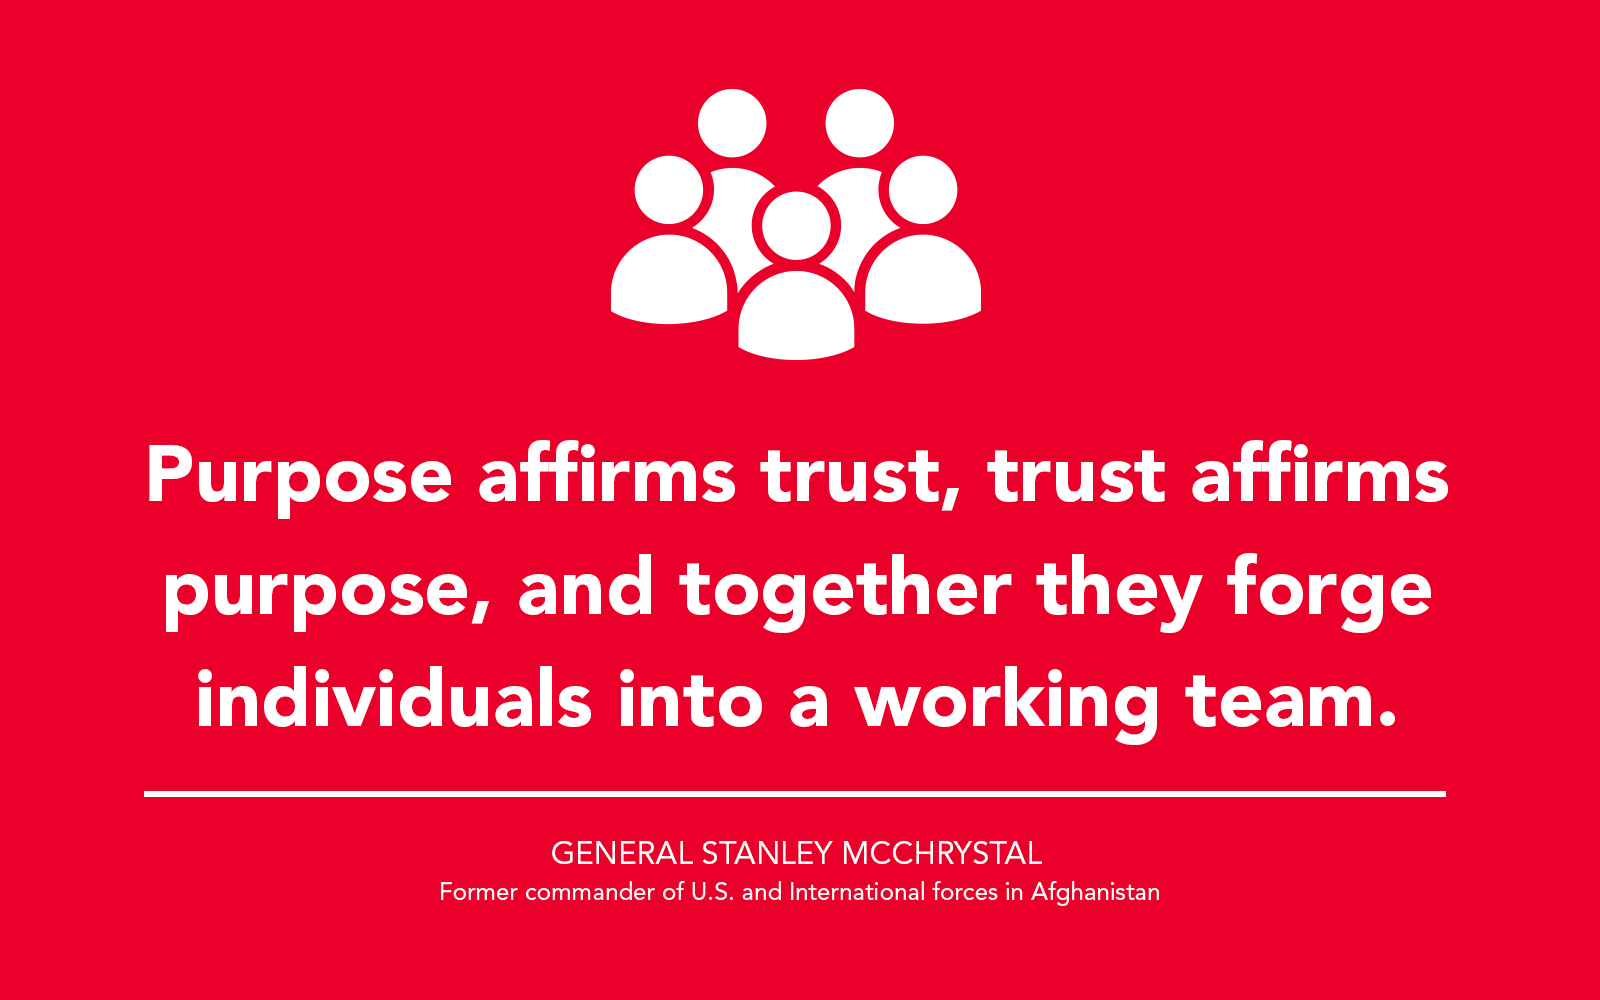 “Purpose affirms trust, trust affirms purpose, and together they forge individuals into a working team.” - General Stanley McChrystal, former commander of U.S. and International forces in Afghanistan